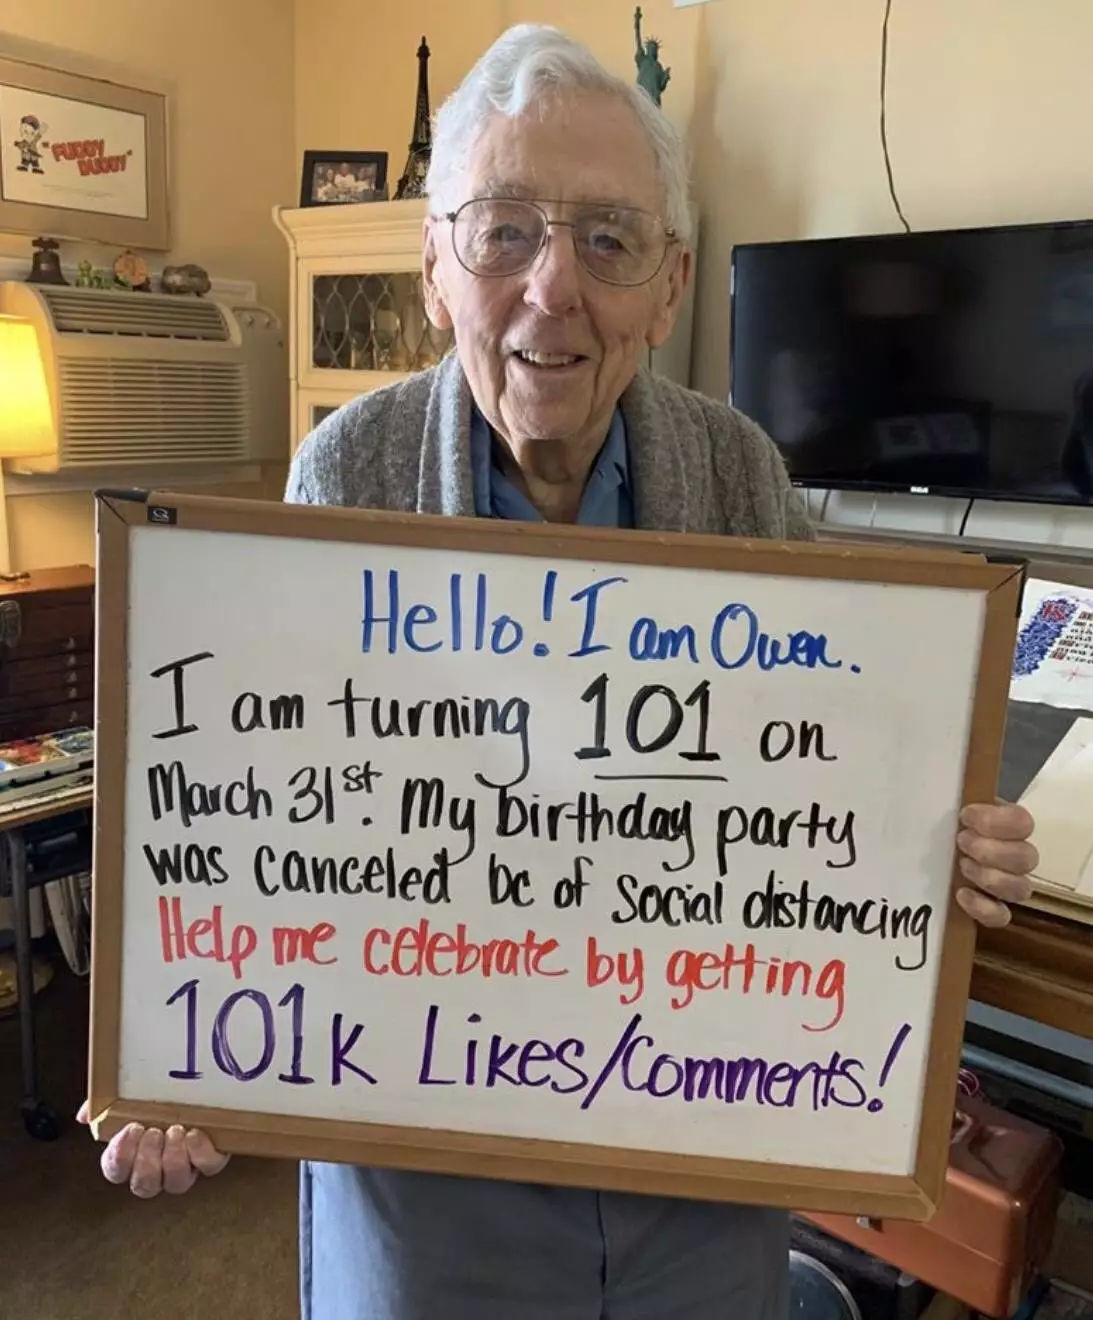 Owen had to cancel his 101st birthday party due to the coronavirus outbreak.